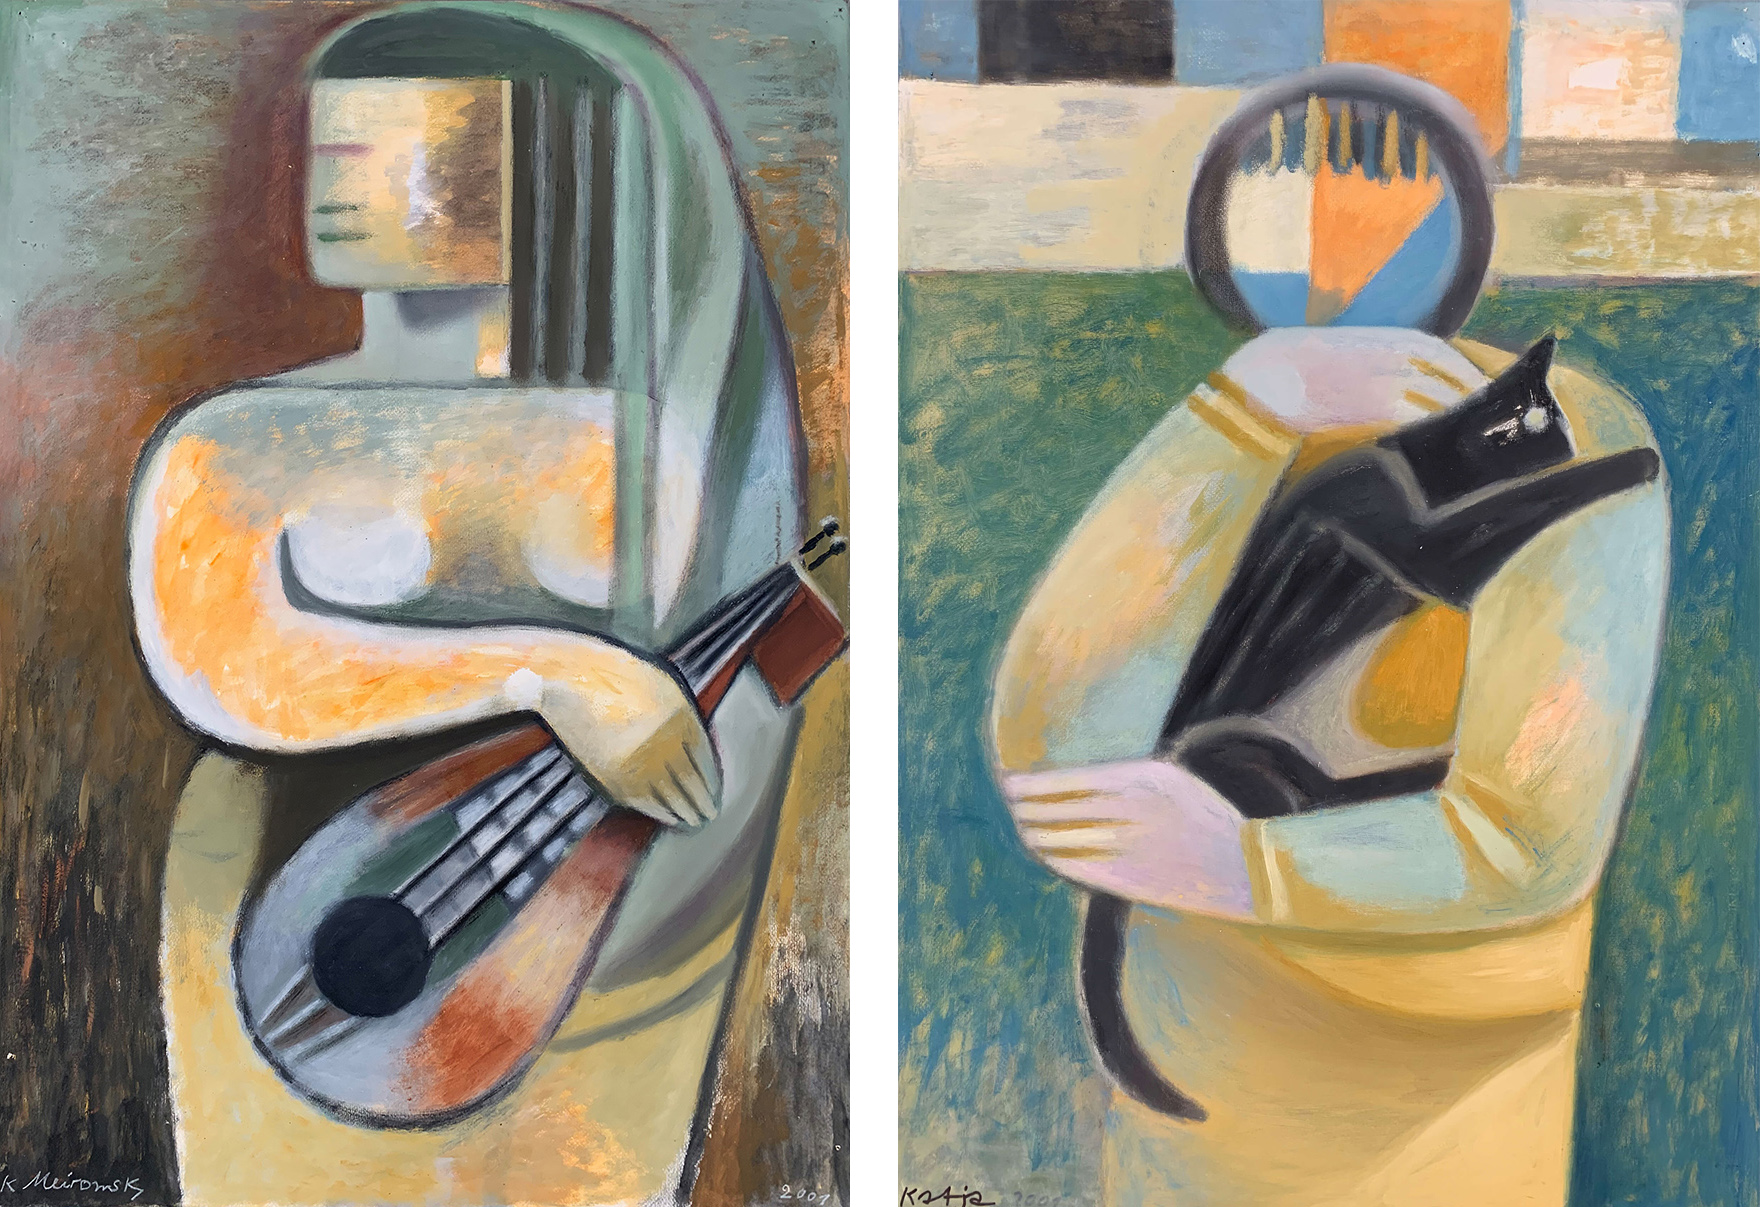 Katja Meirowsky | Walk with Corki (left) and Woman with Guitar (right) | 2000 | mixed media and pastel